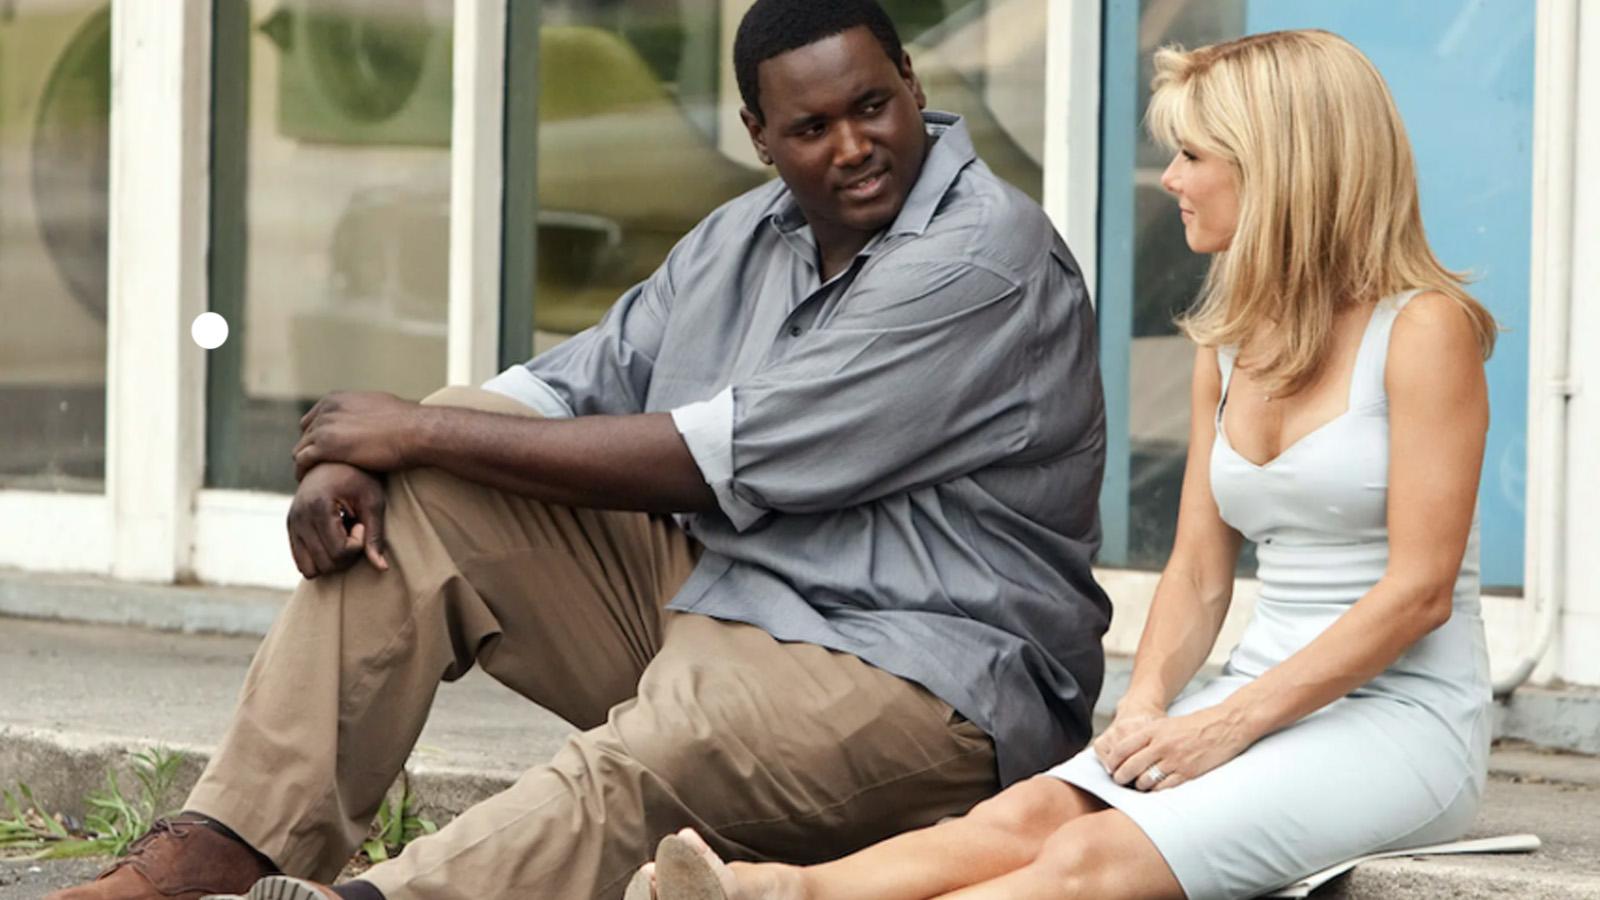 Debate sparks following The Blind Side controversy